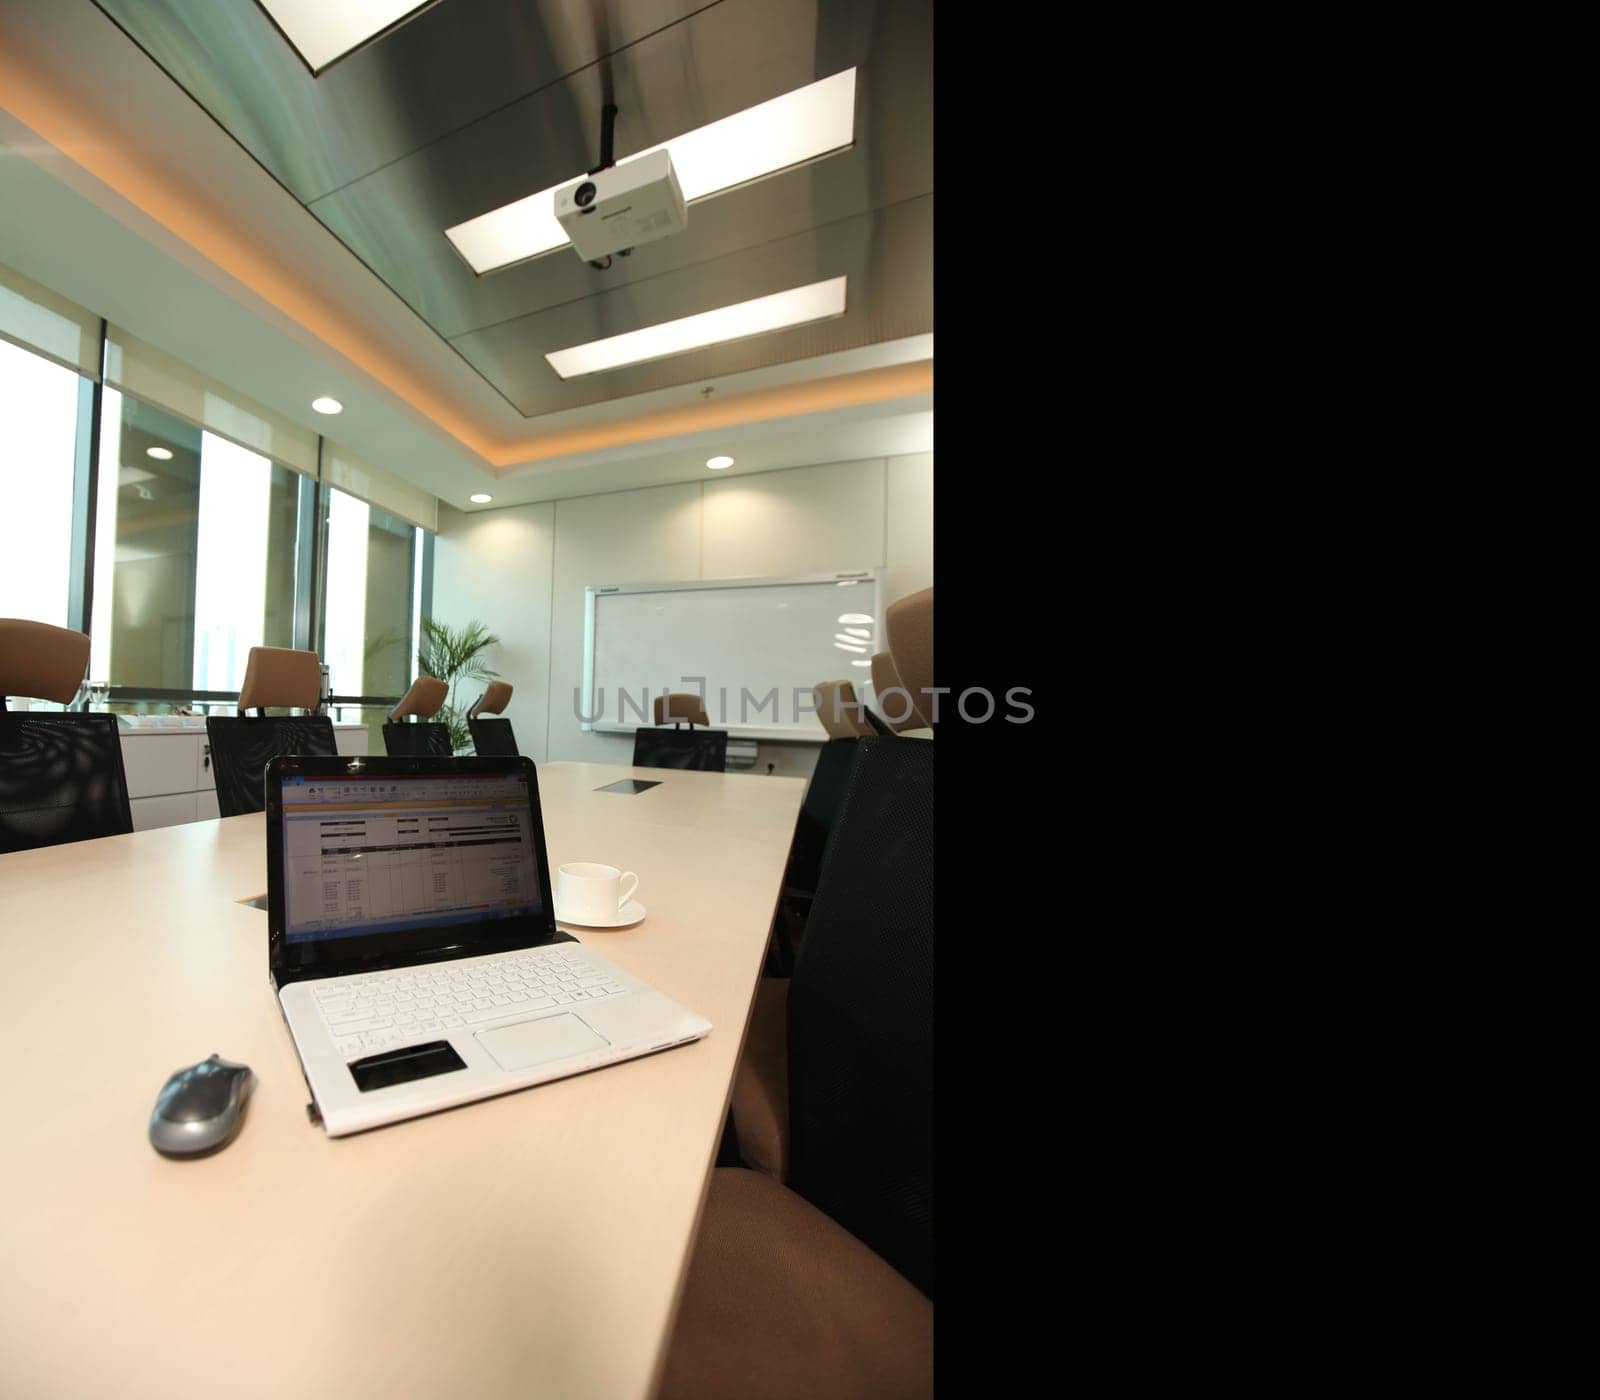 office interior background for design and presentation background, content and multimedia creative background